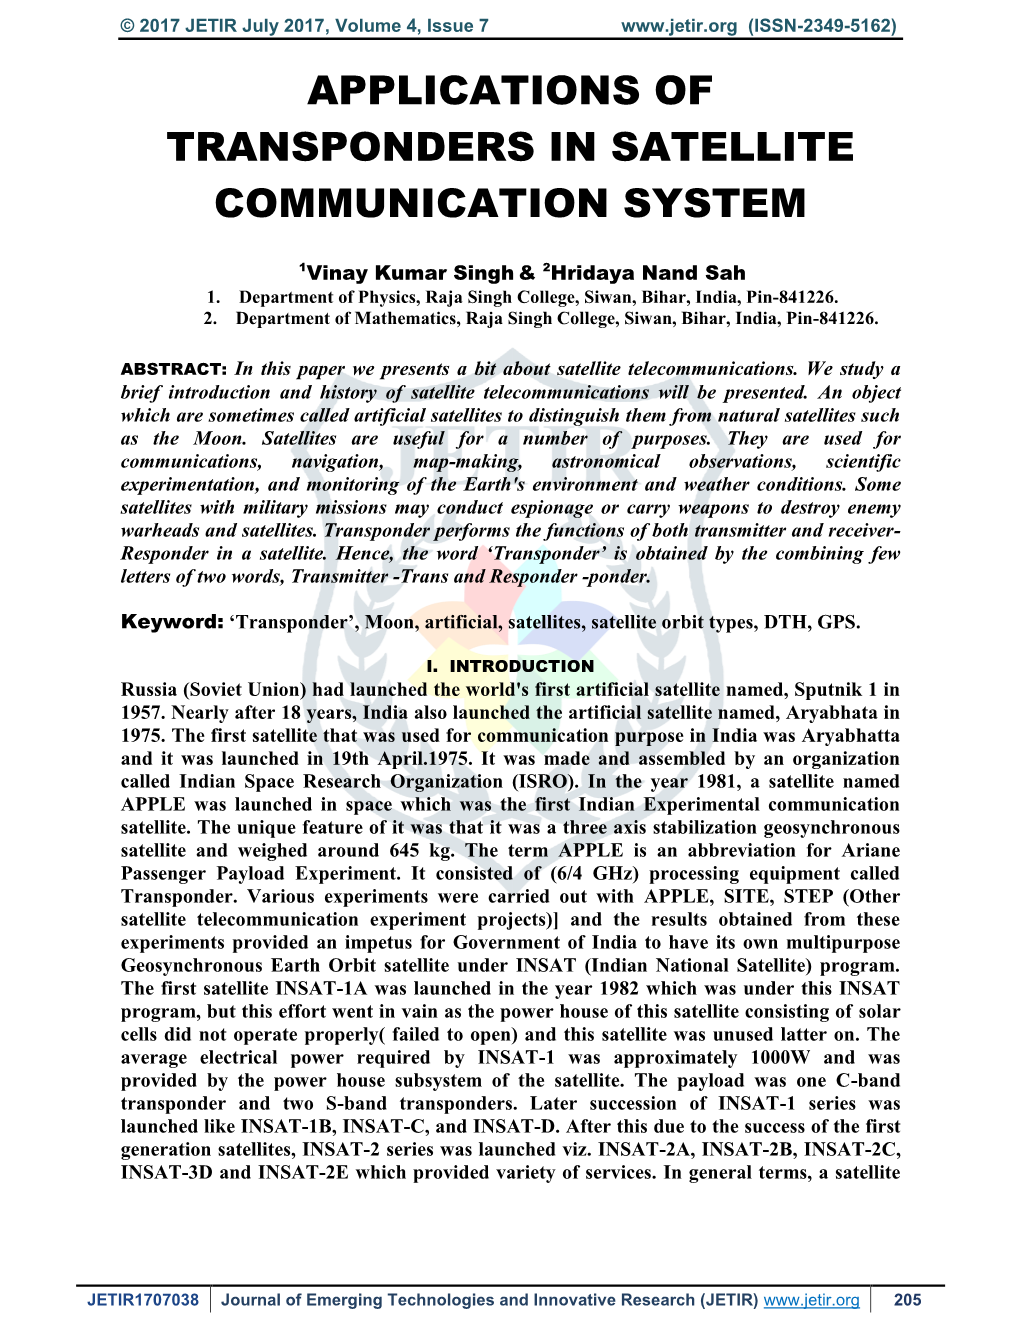 Applications of Transponders in Satellite Communication System